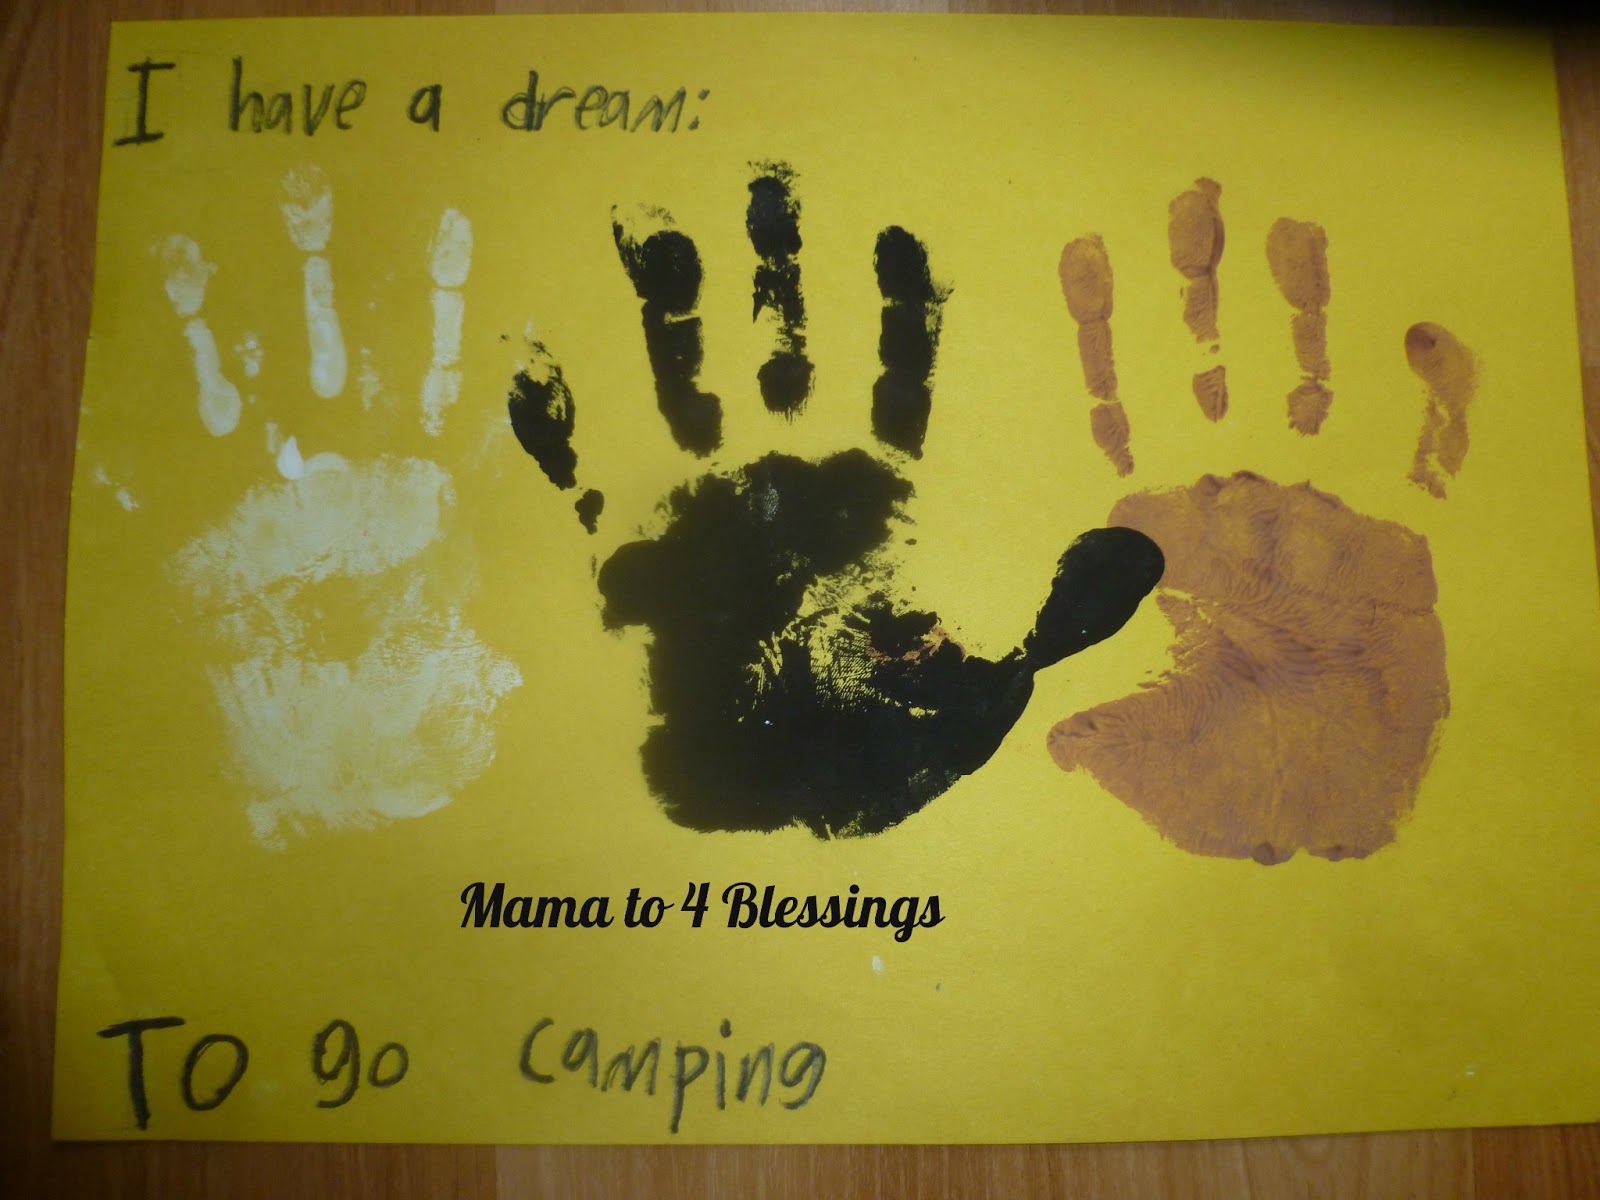 MARTIN LUTHER KING JR. LAPBOOK & CRAFT - Mama to 6 Blessings